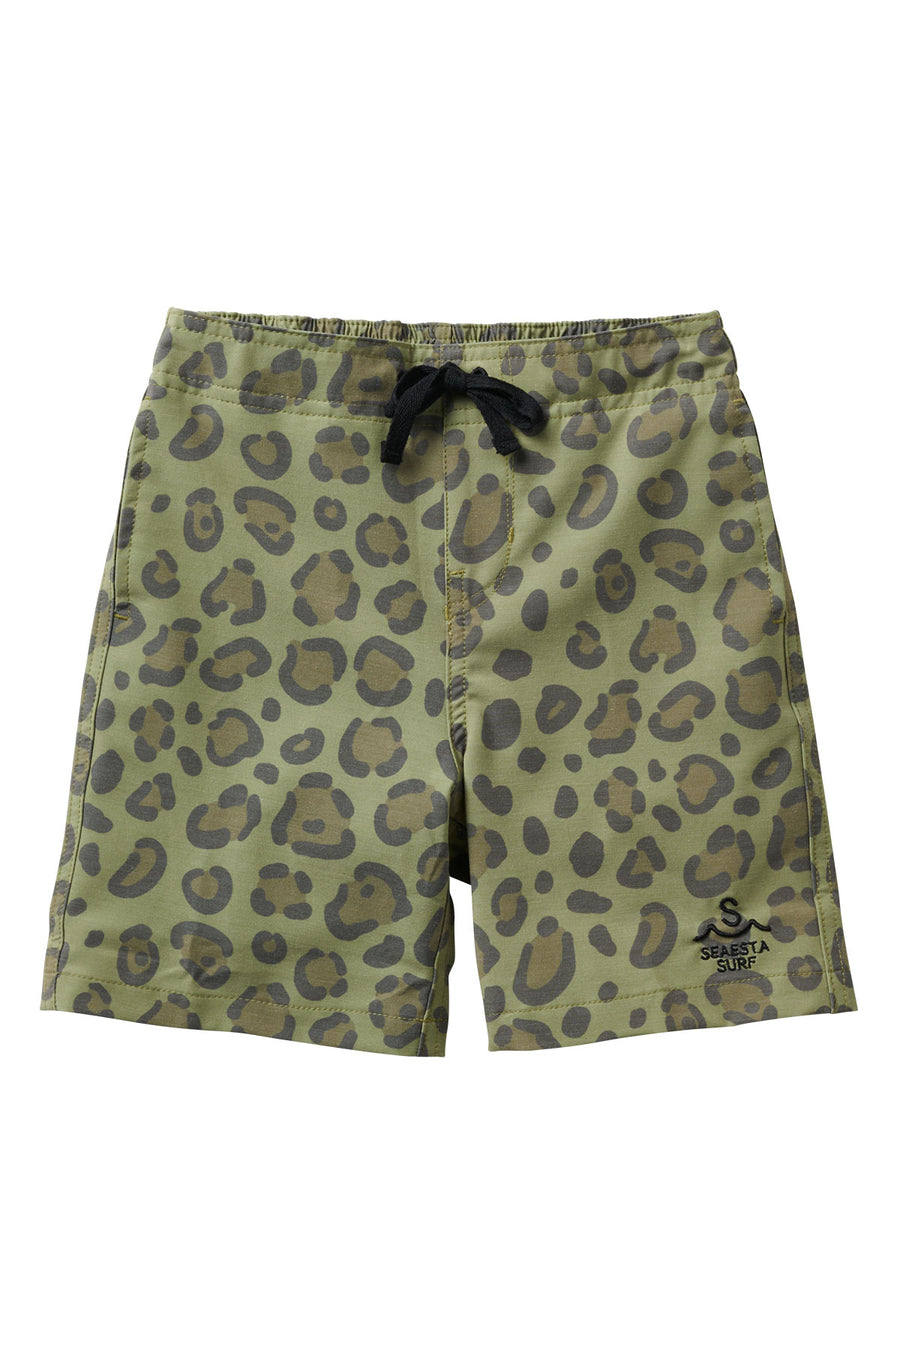 Seaesta Stay Dry Walk Short With Liner | Calico Crab | Army